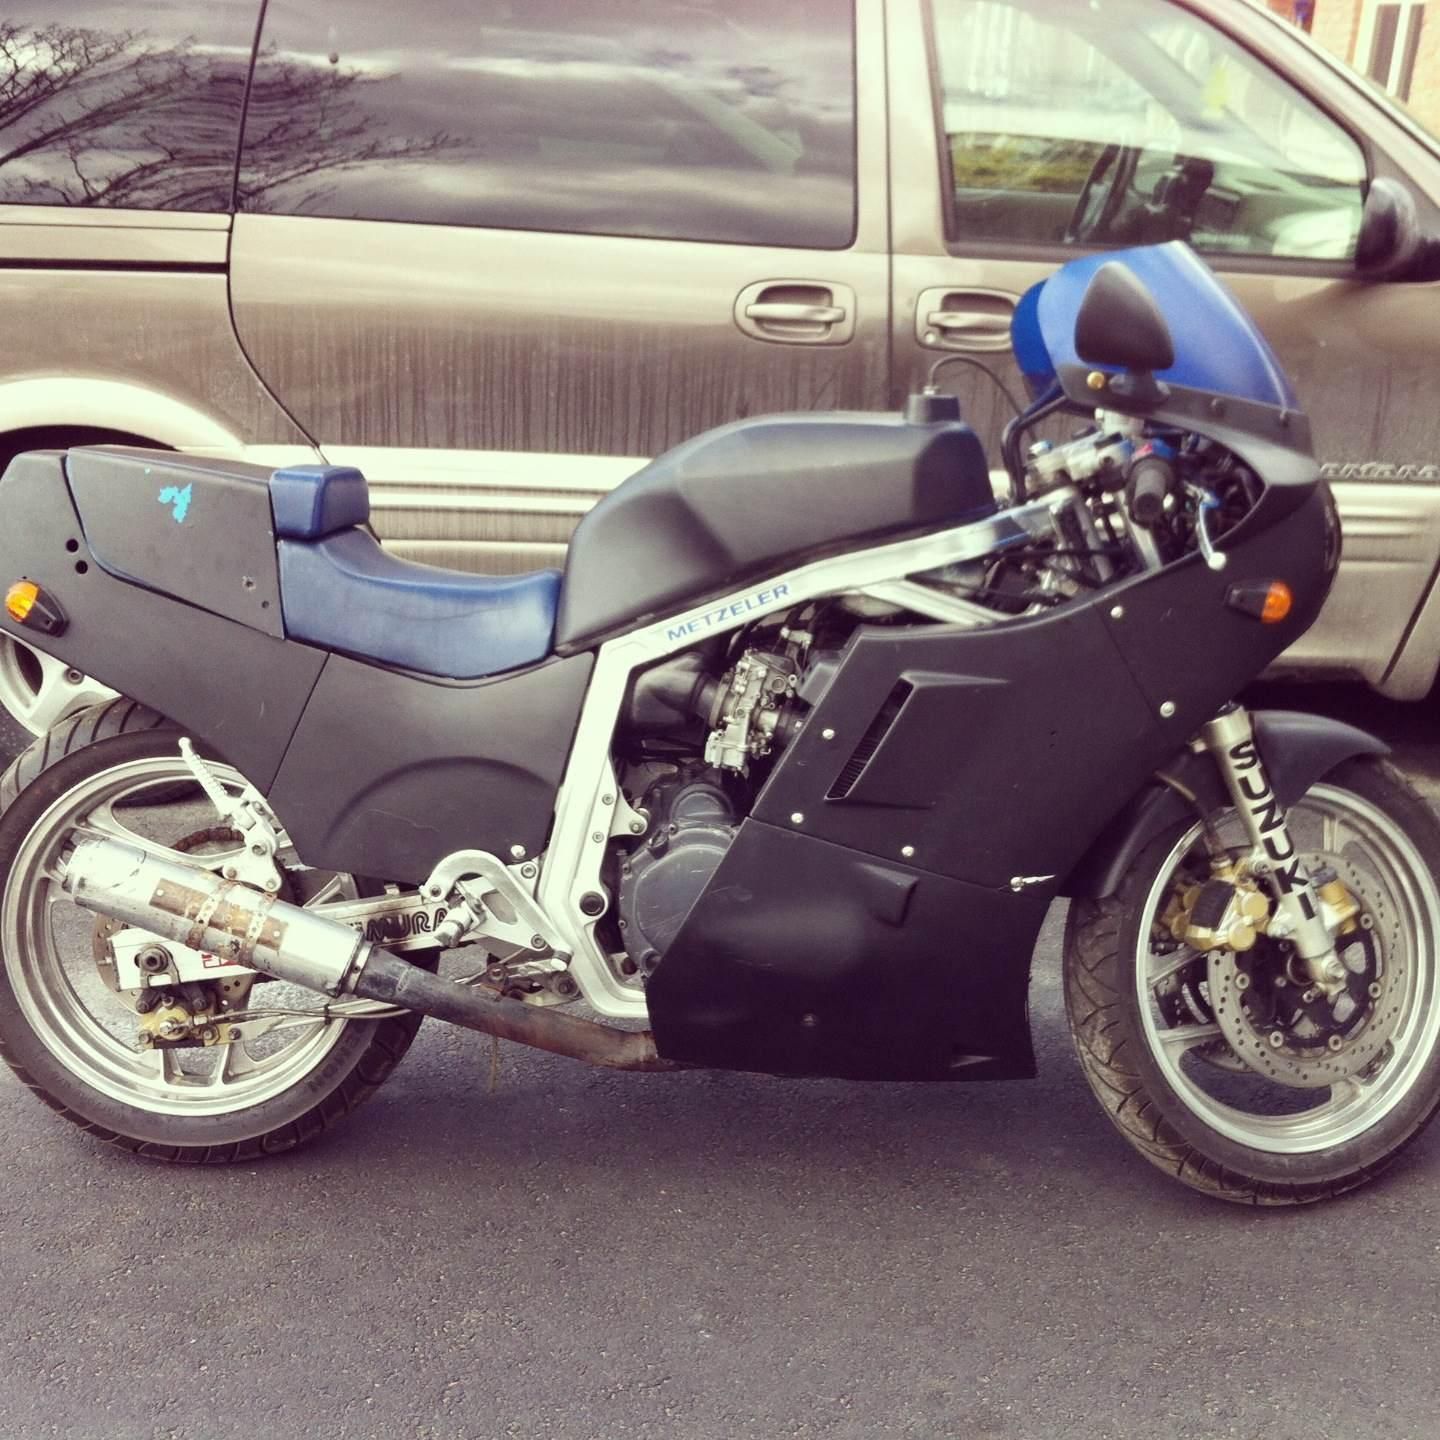 GSXR before i cleaner her all up ( Note the rediculous muffler set-up )